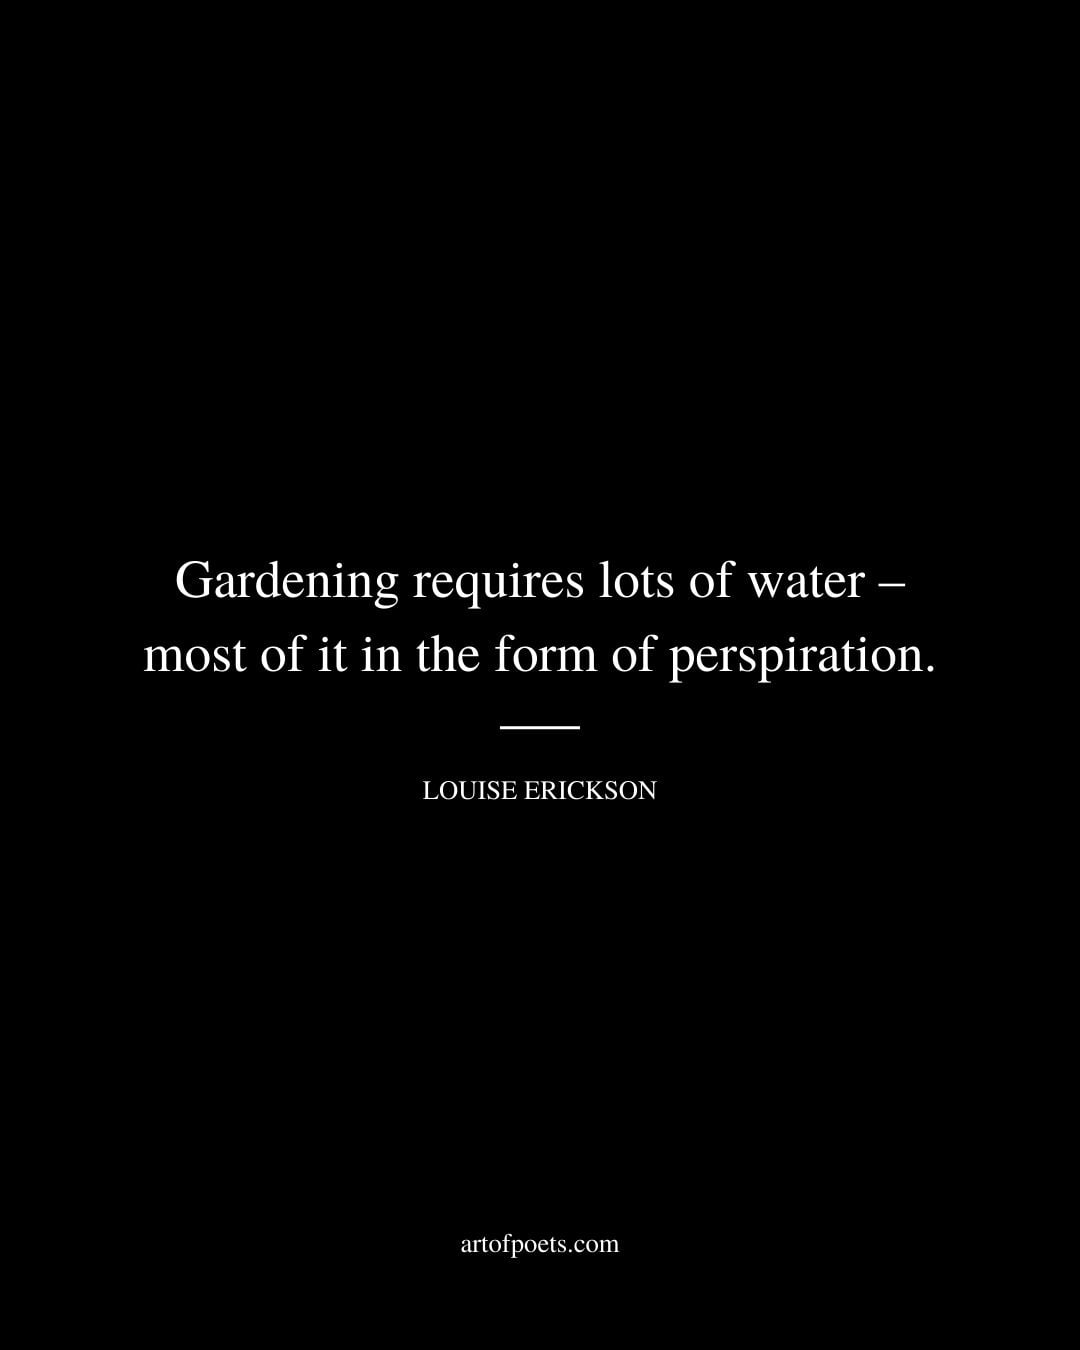 Gardening requires lots of water – most of it in the form of perspiration. Louise Erickson